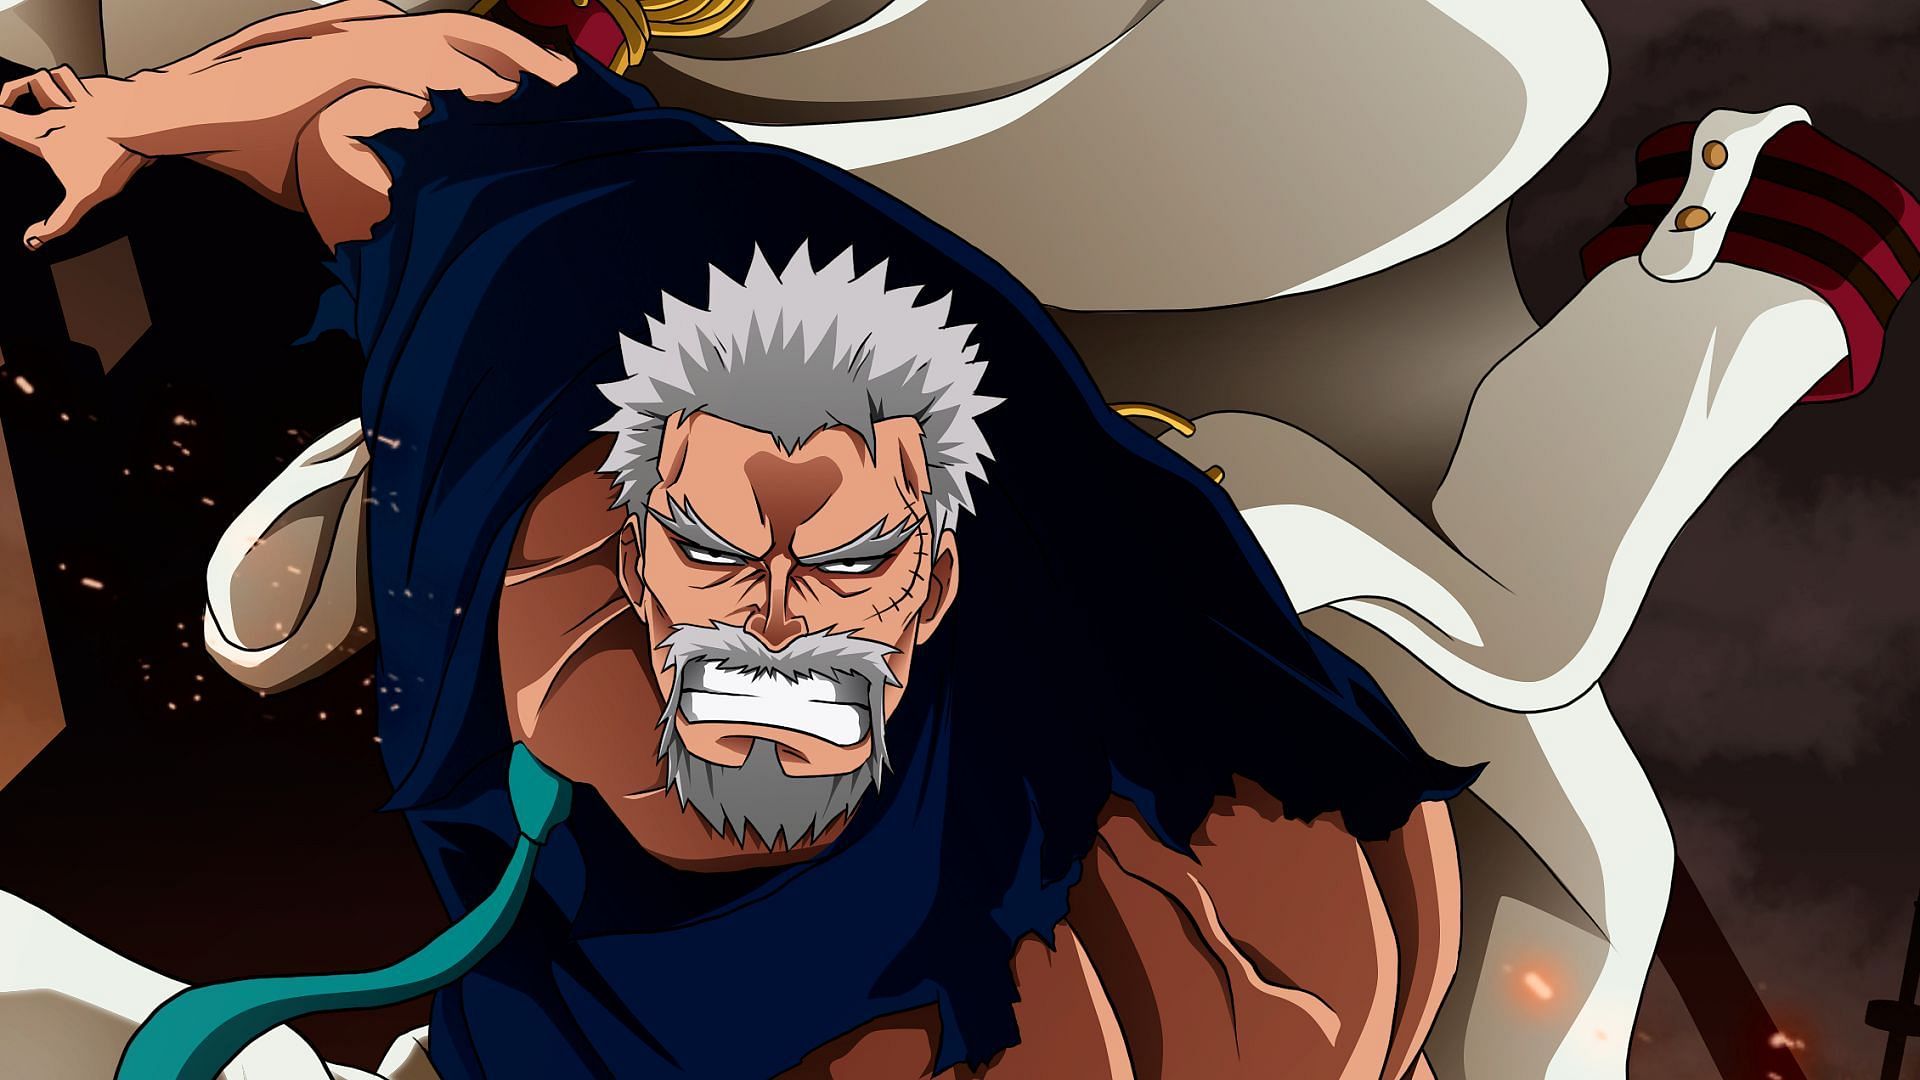 To rescue Koby, Vice Admiral Garp may be about to fight an intense battle with Blackbeard and his crew (Image via Eiichiro Oda/Shueisha, One Piece)